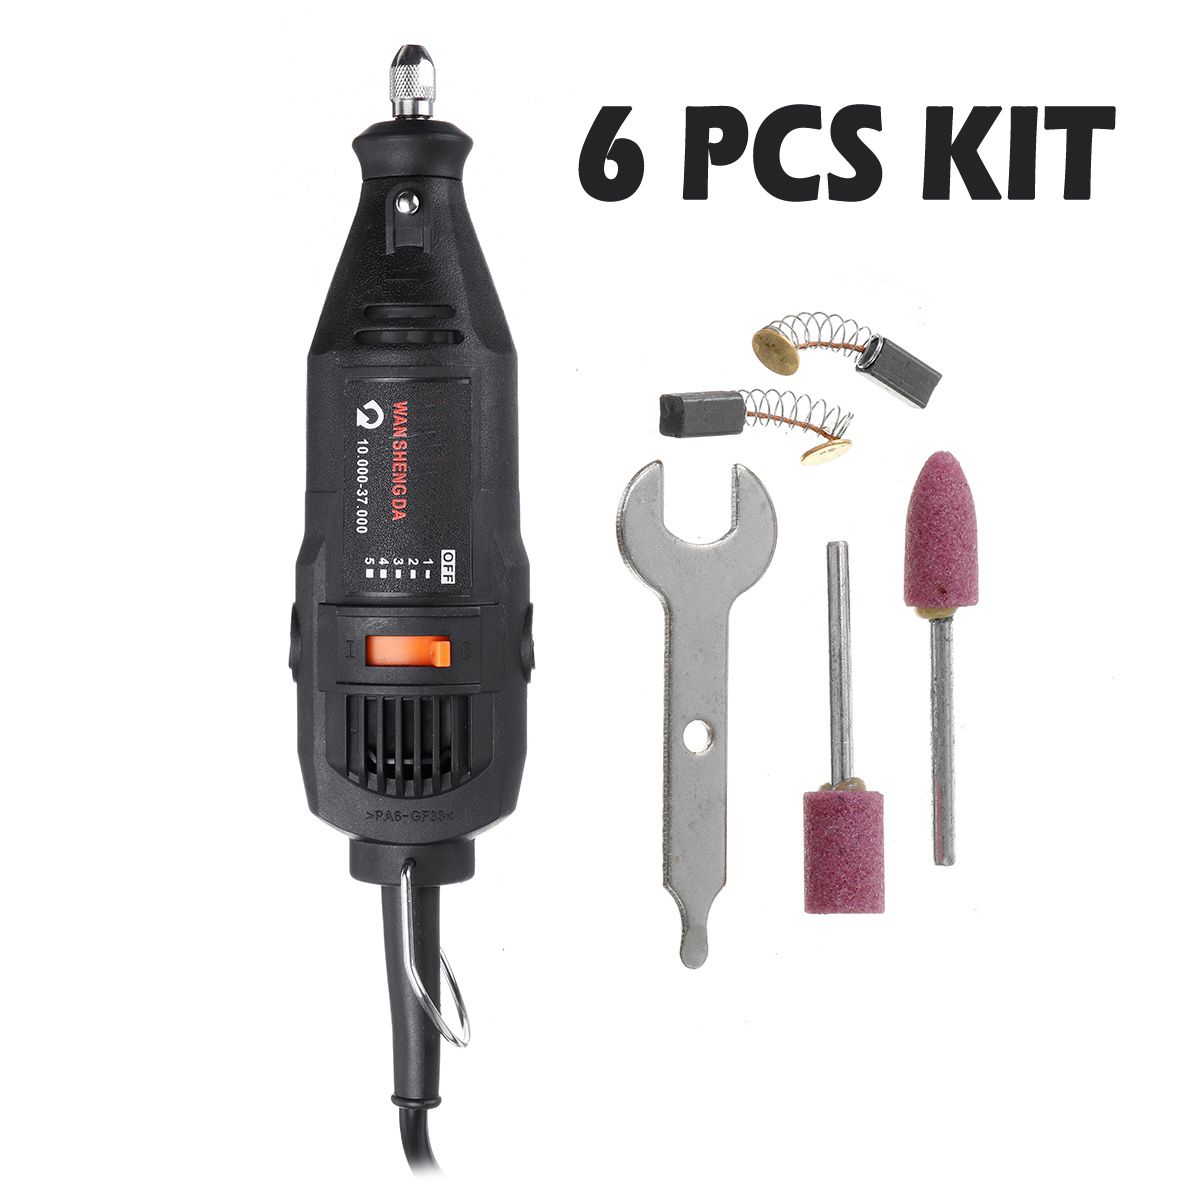 180W-Adjutable-Speed-Electric-Rotary-Drill-Grinder-Engraver-Polisher-DIY-Tool-Electric-Drill-Set-Pol-1703733